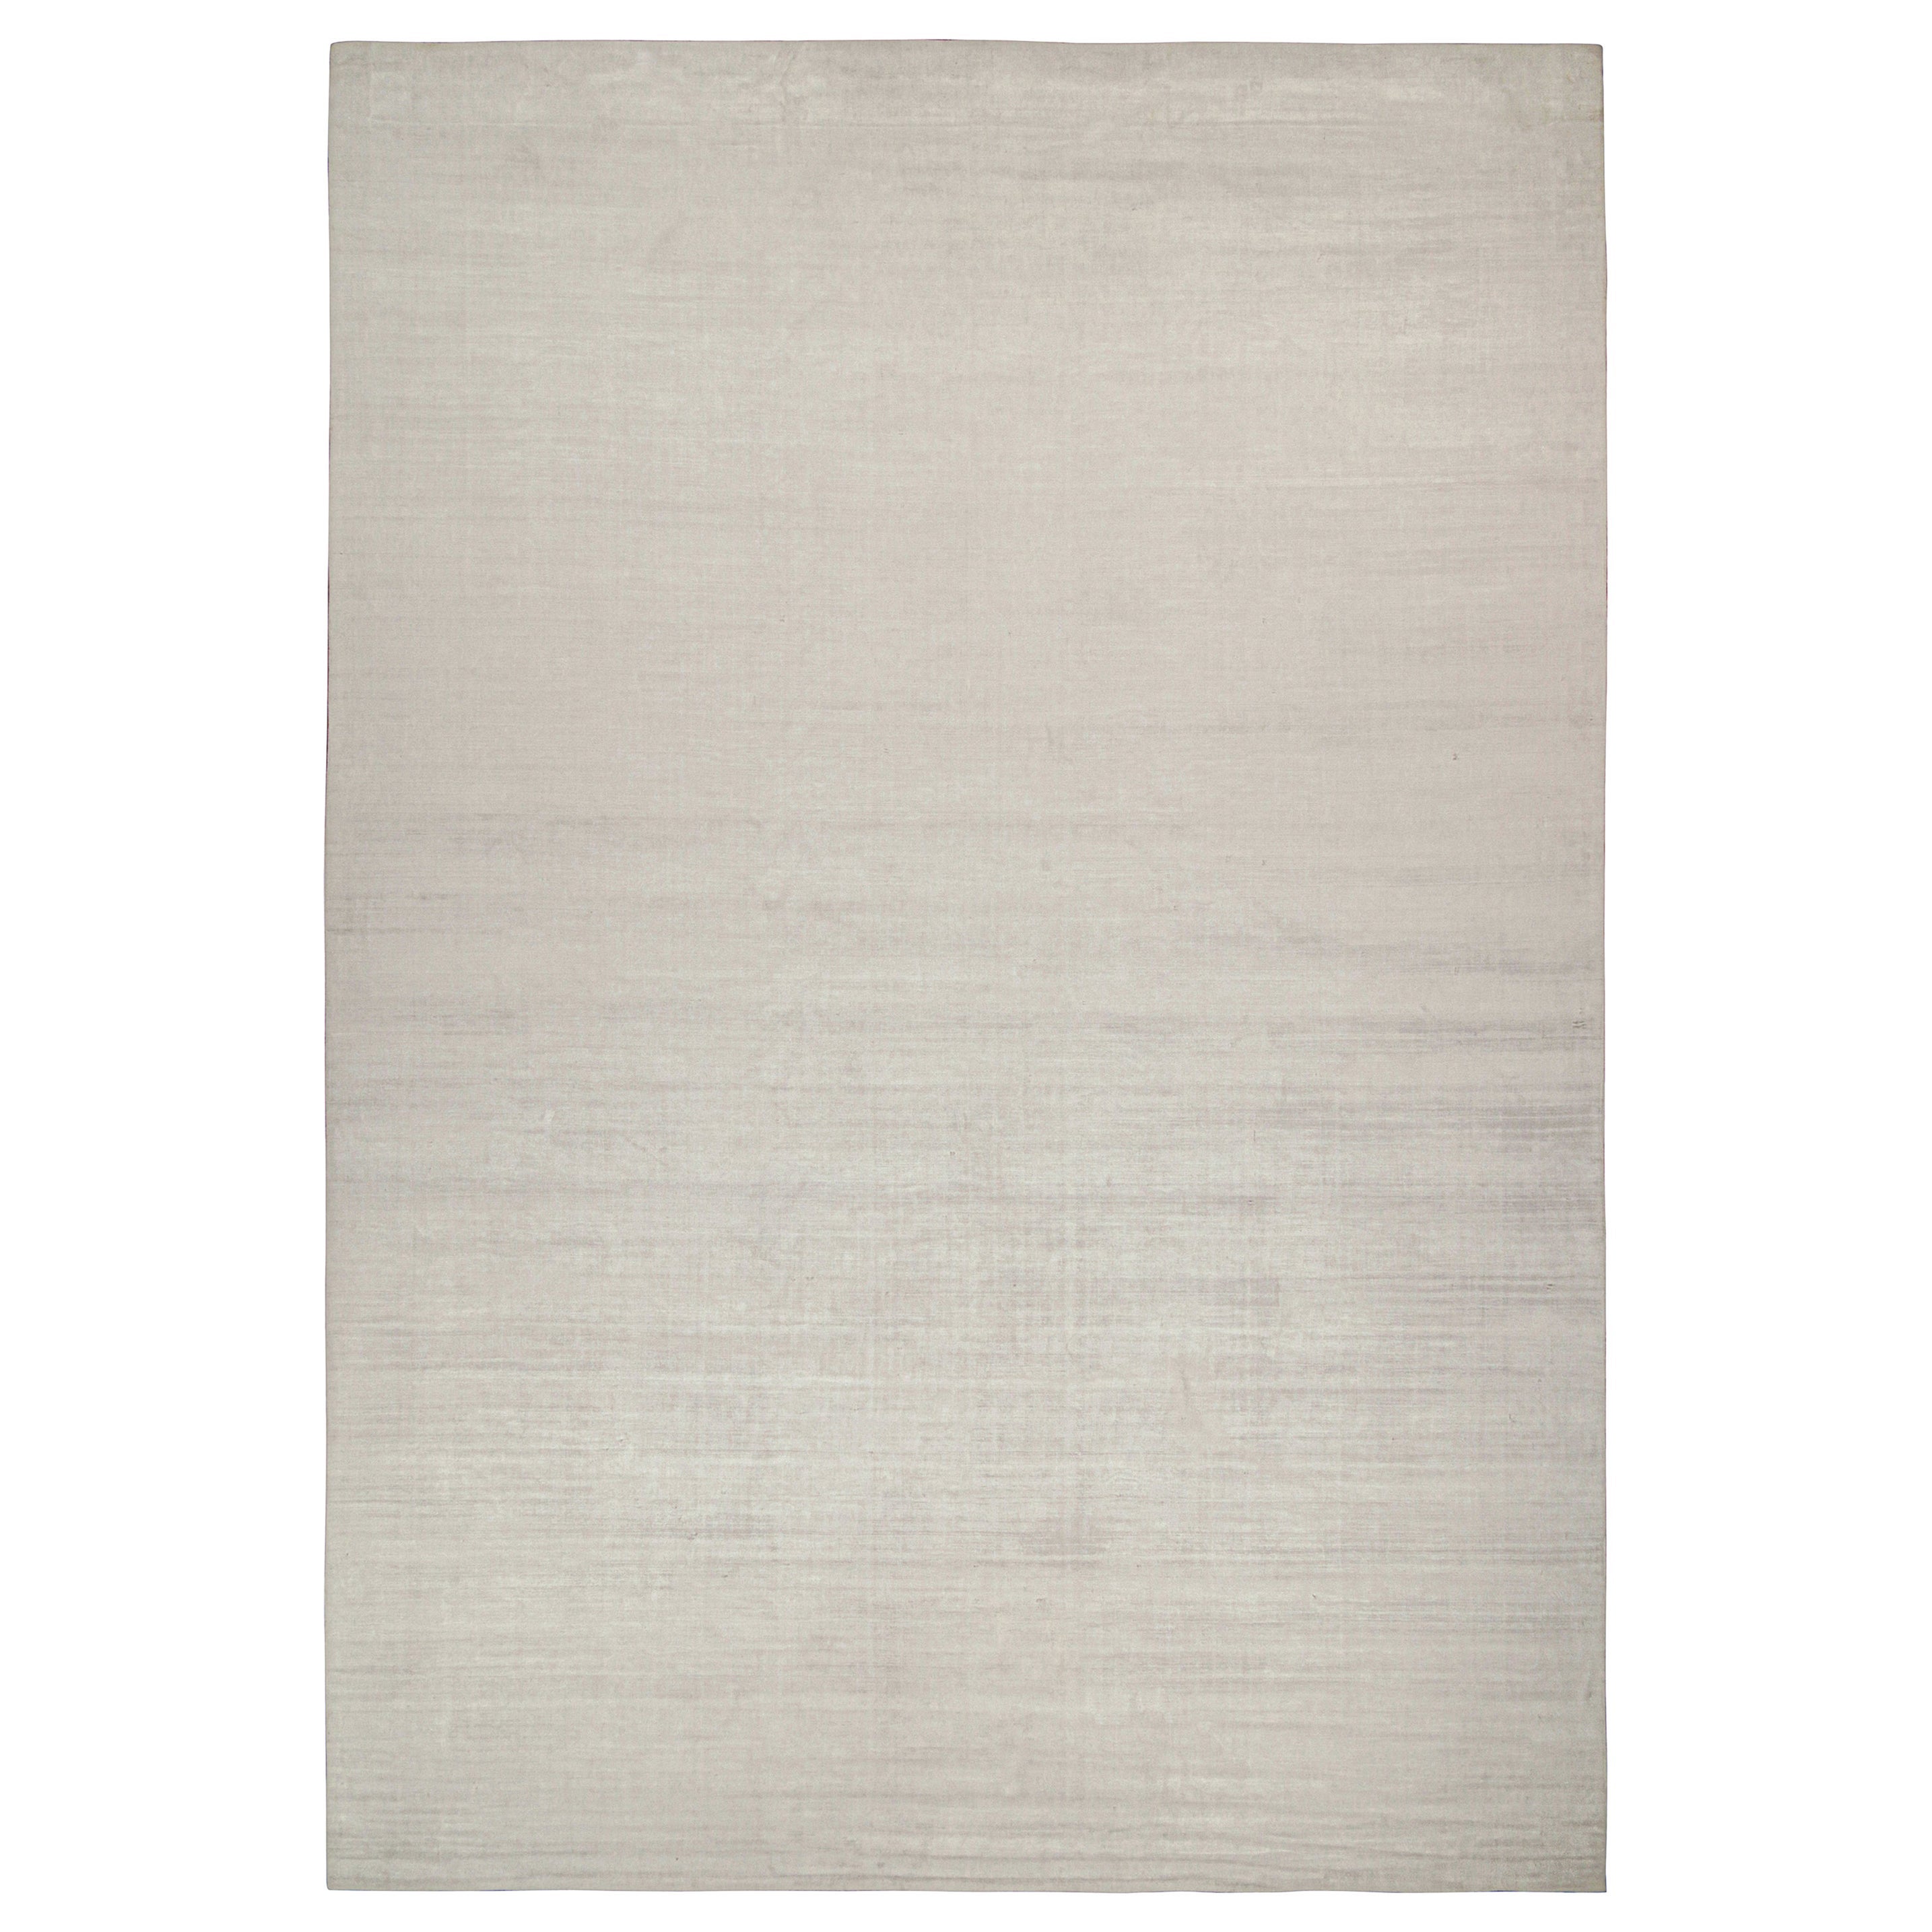 Rug & Kilim’s Plain Modern Rug in Solid Silver and Off-White Tone-on-Tone